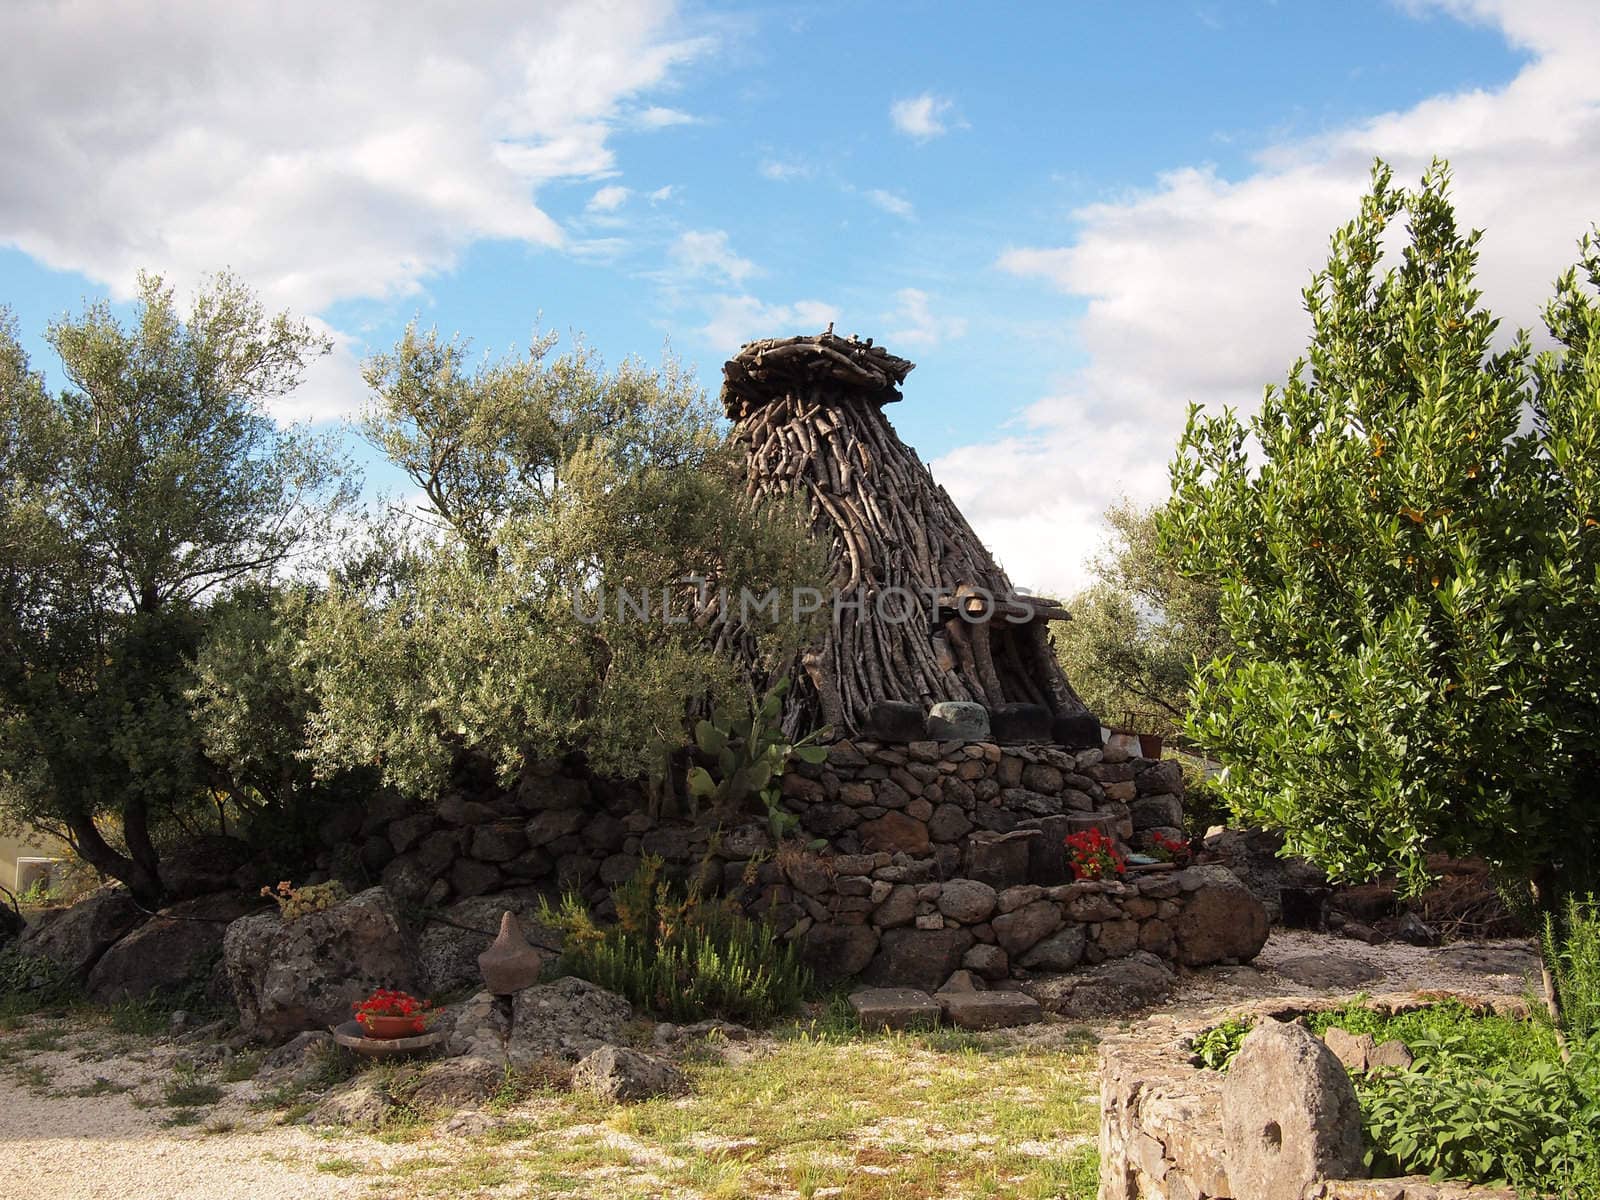 Traditional sardinian shepherd�s house called pinnetta, made of wood.